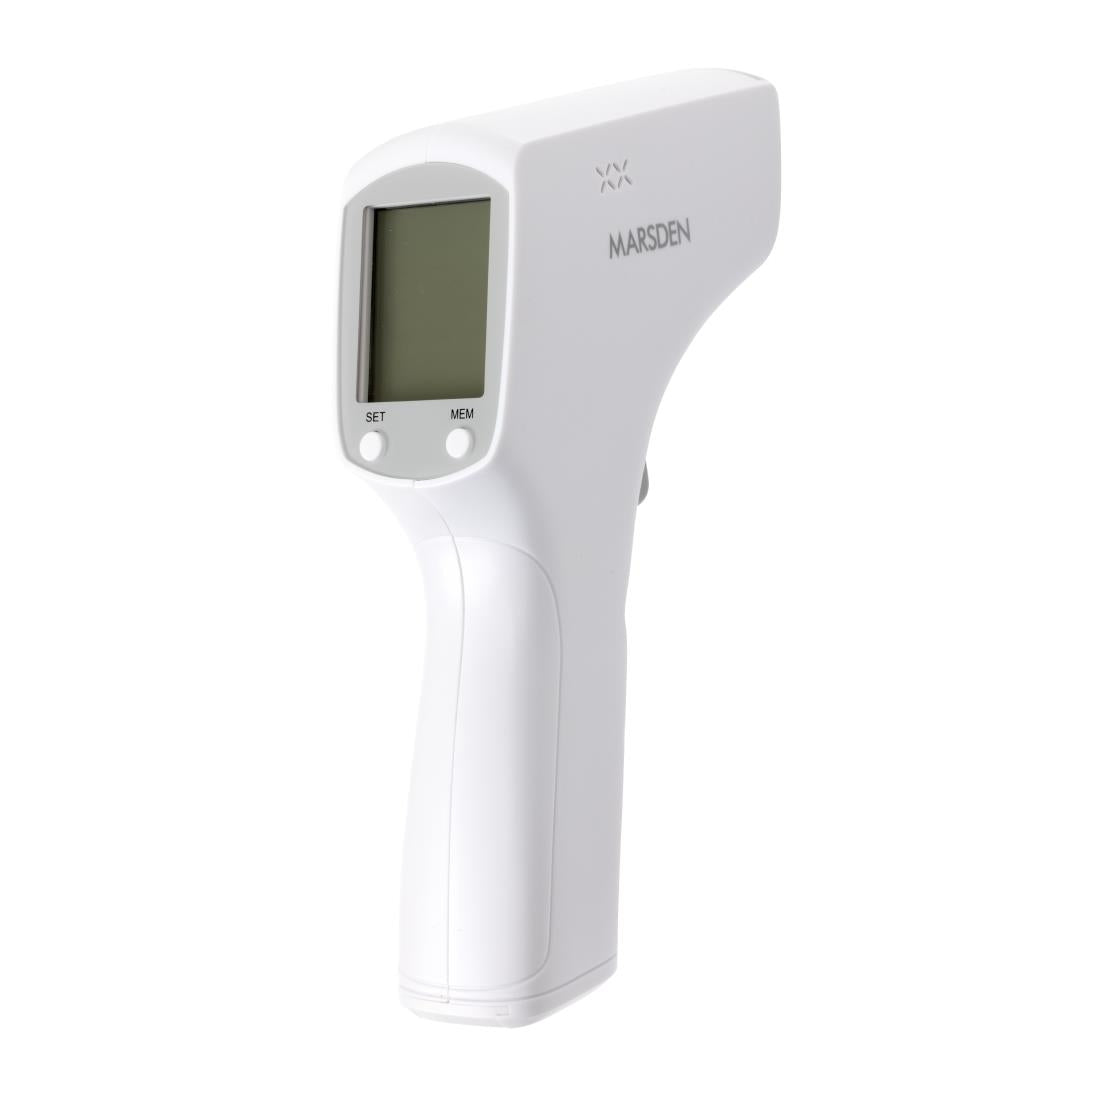 DF717 Marsden Non-Contact Infrared Forehead Thermometer FT3010 JD Catering Equipment Solutions Ltd